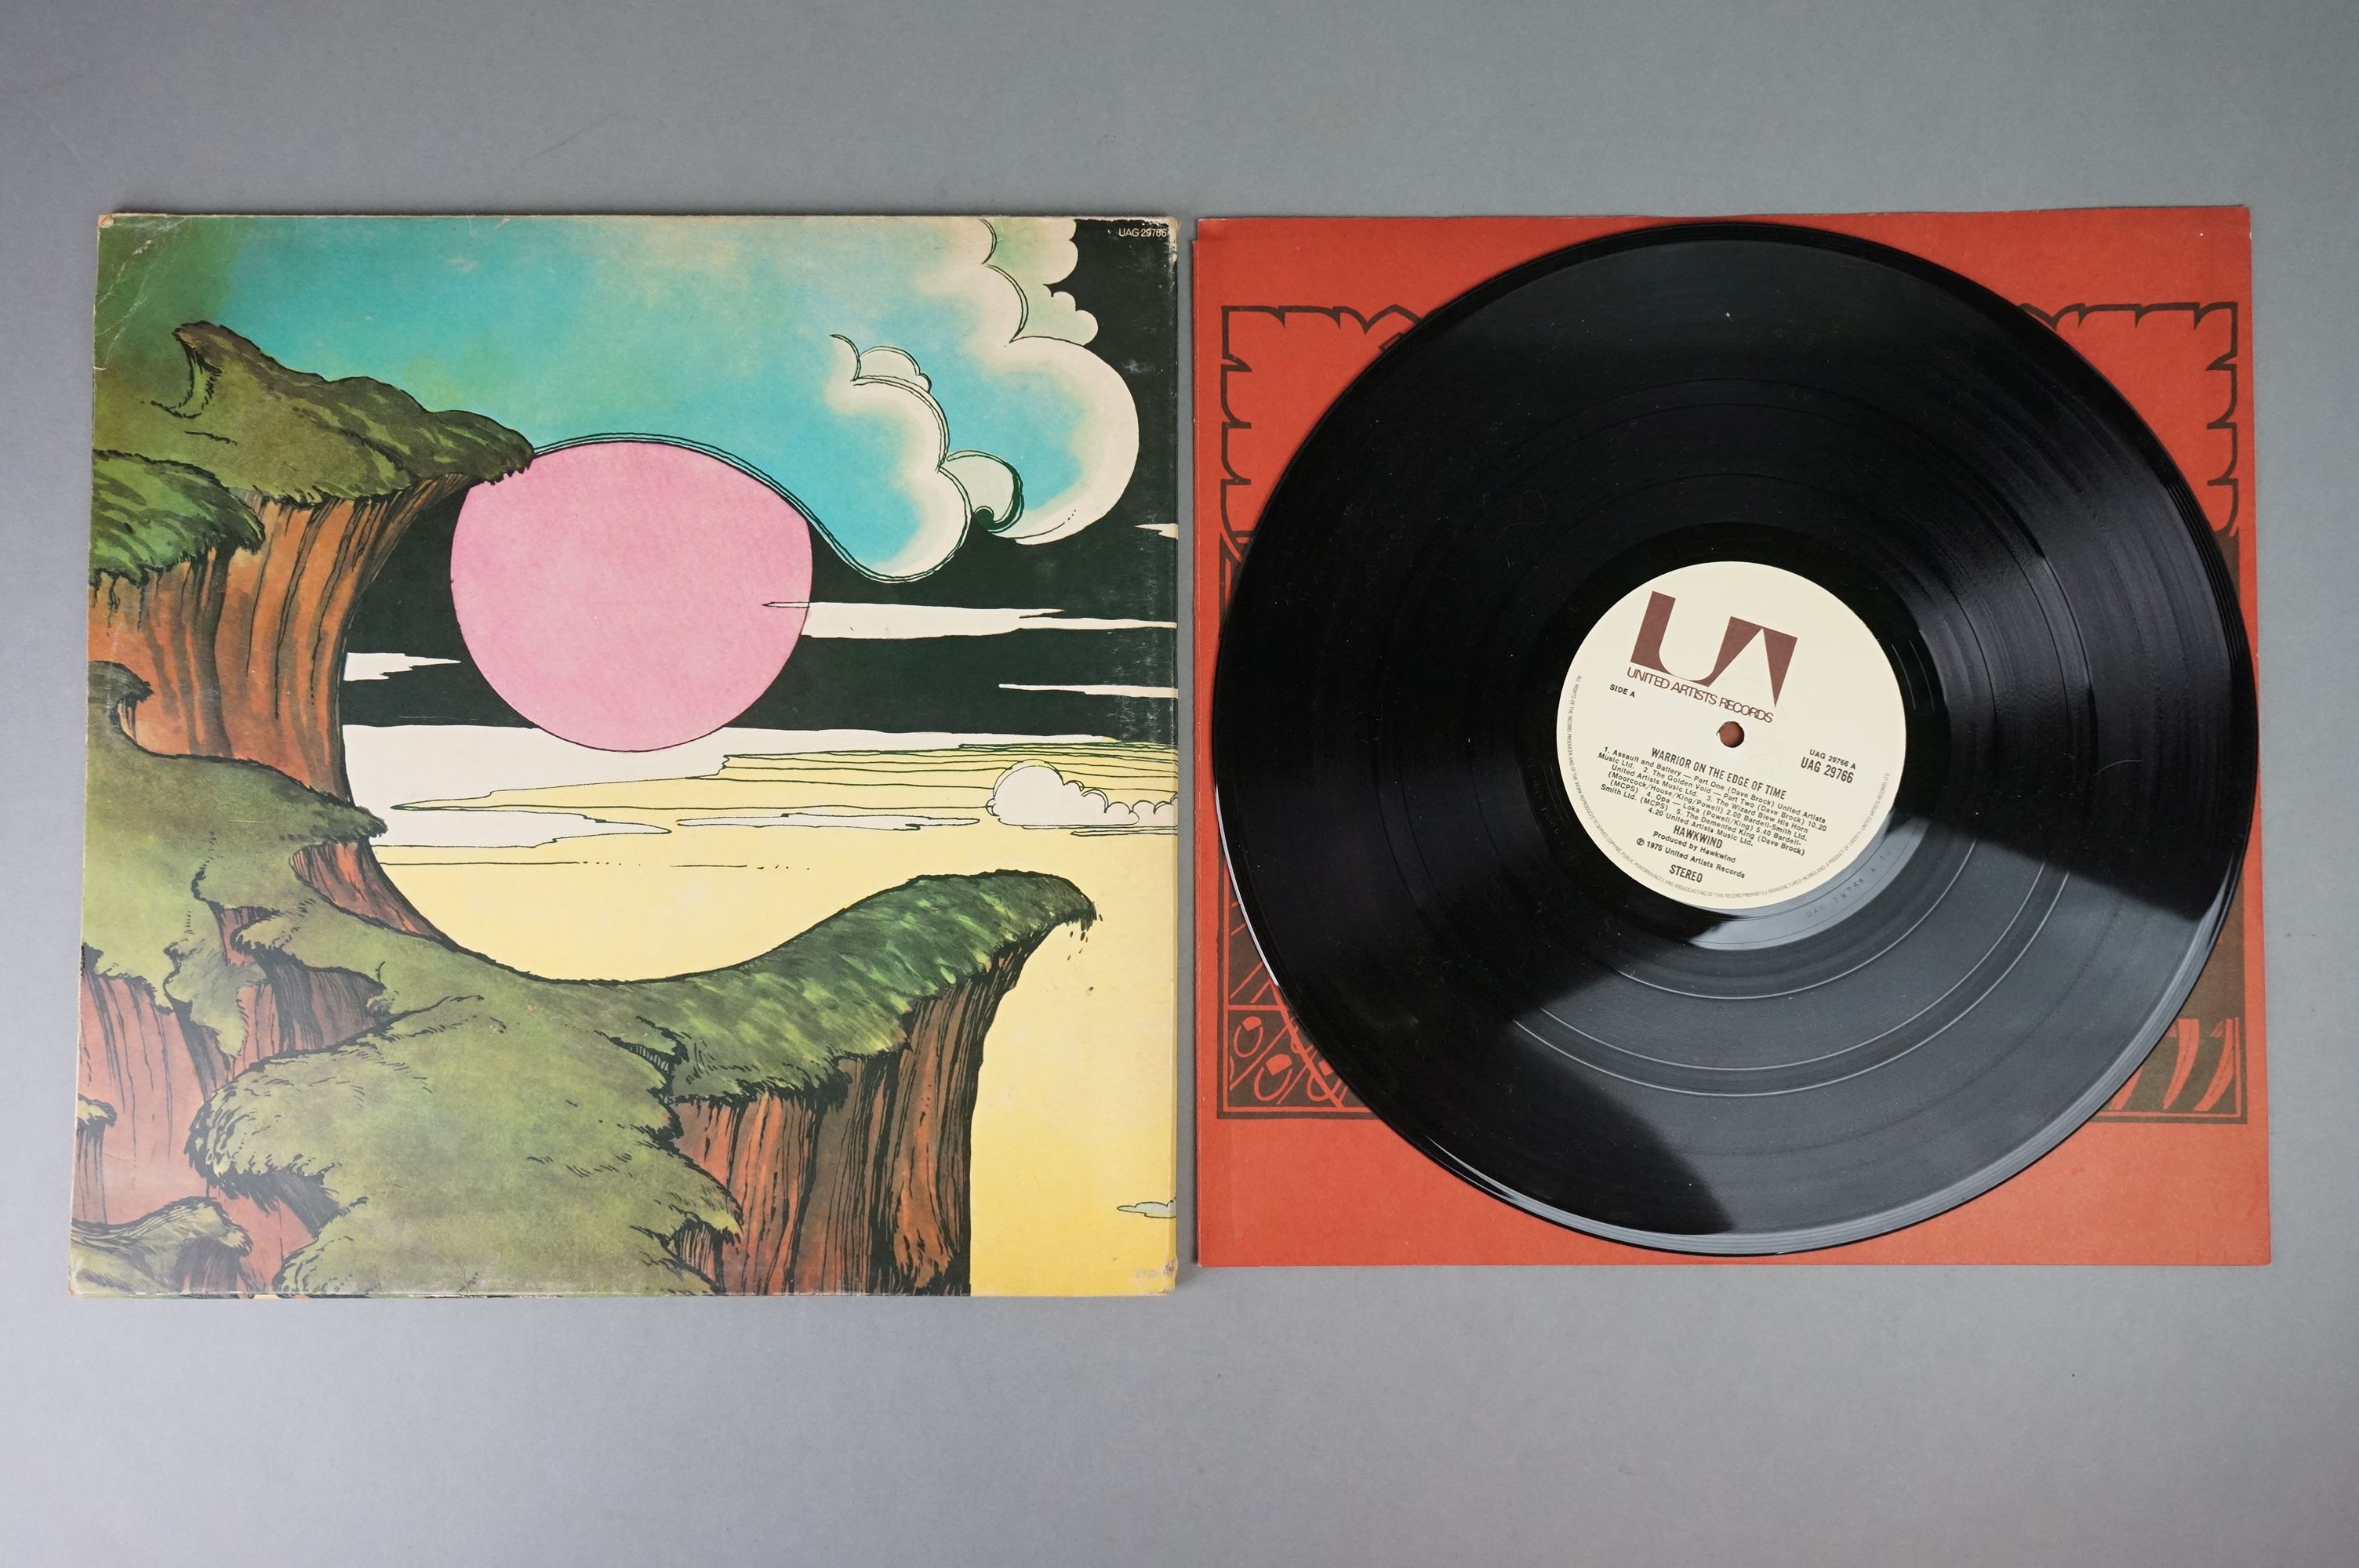 Vinyl - Hawkwind Warrior On The Edge Of Time (UAG 29766) complete with inner, gatefold intact. - Image 5 of 8